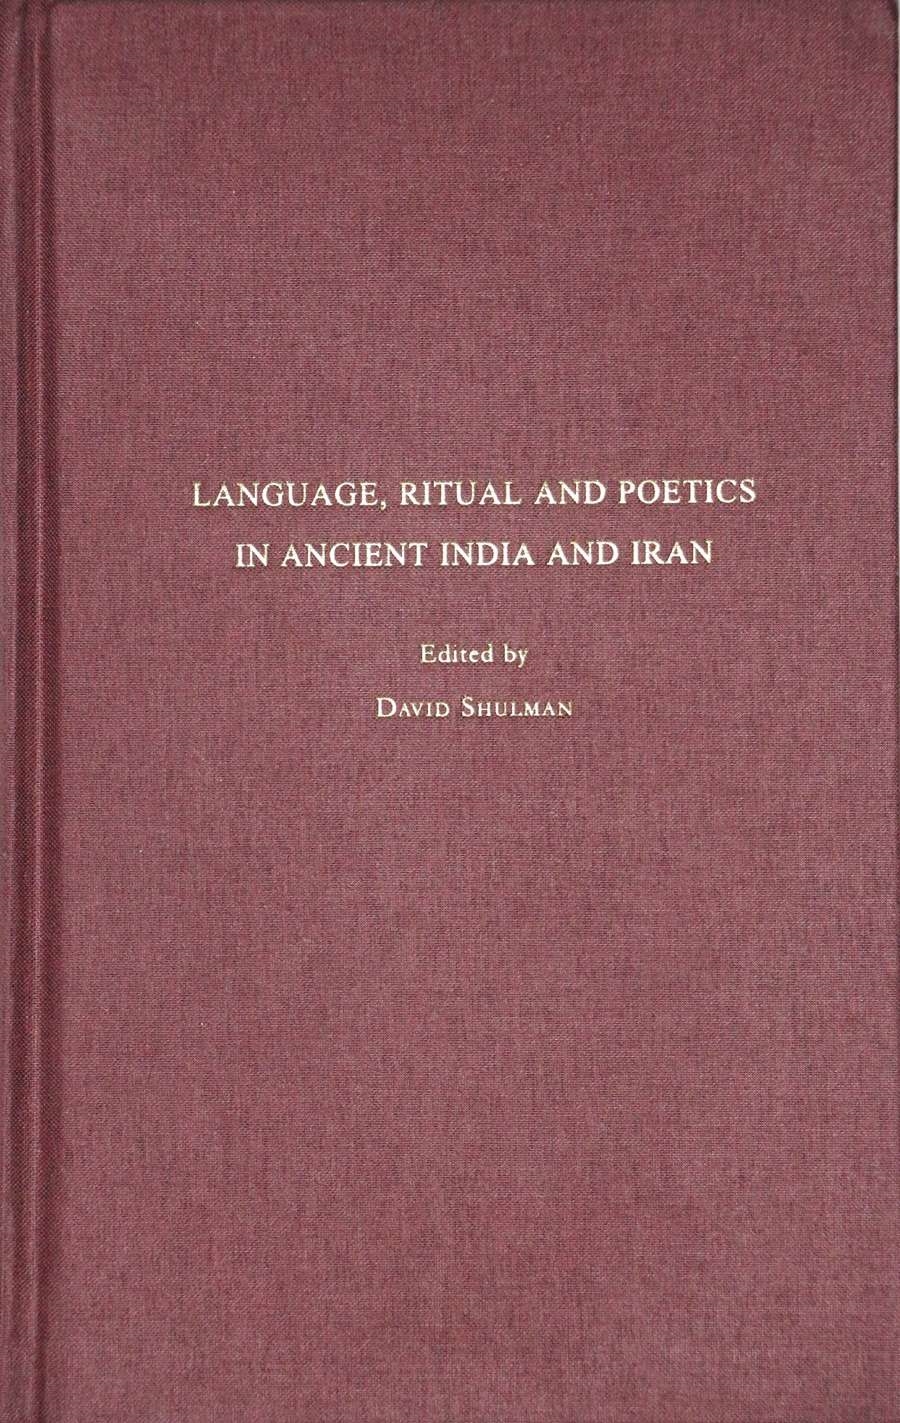 Language, Ritual and Poetics in Ancient India and Iran